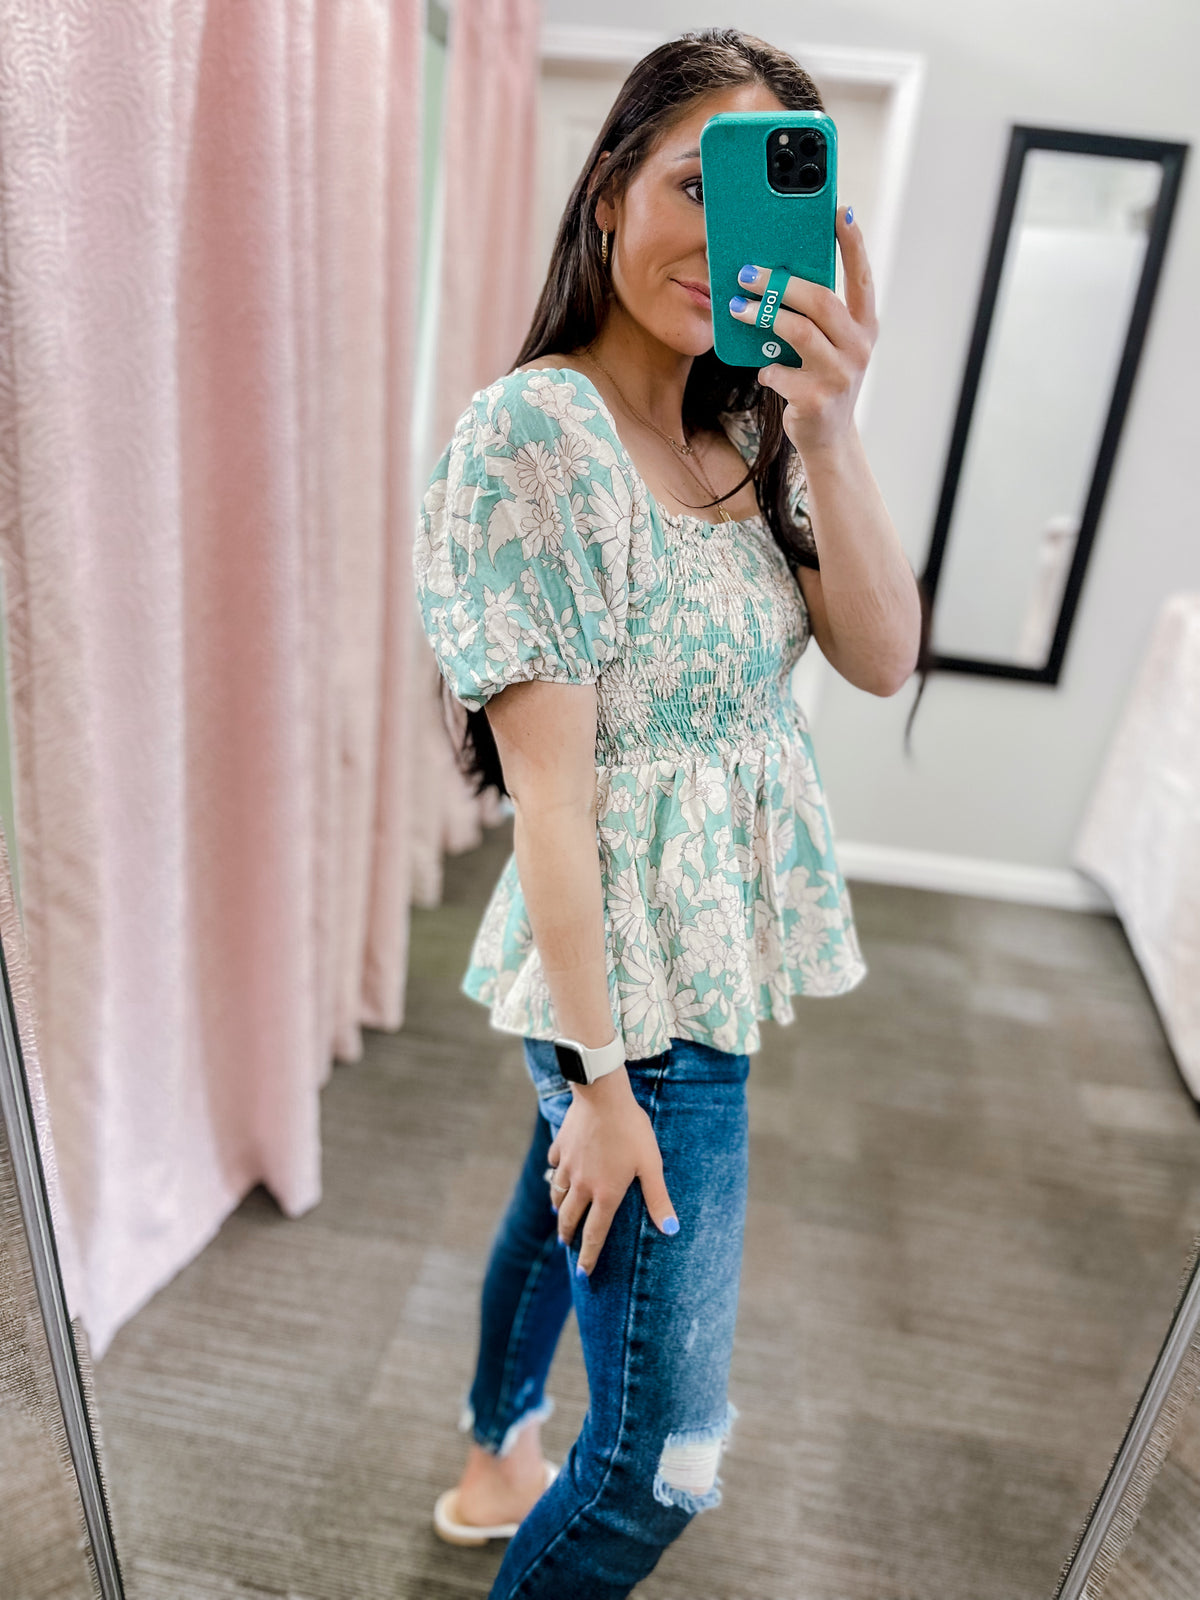 It's Your Destiny- Teal Smocked Top